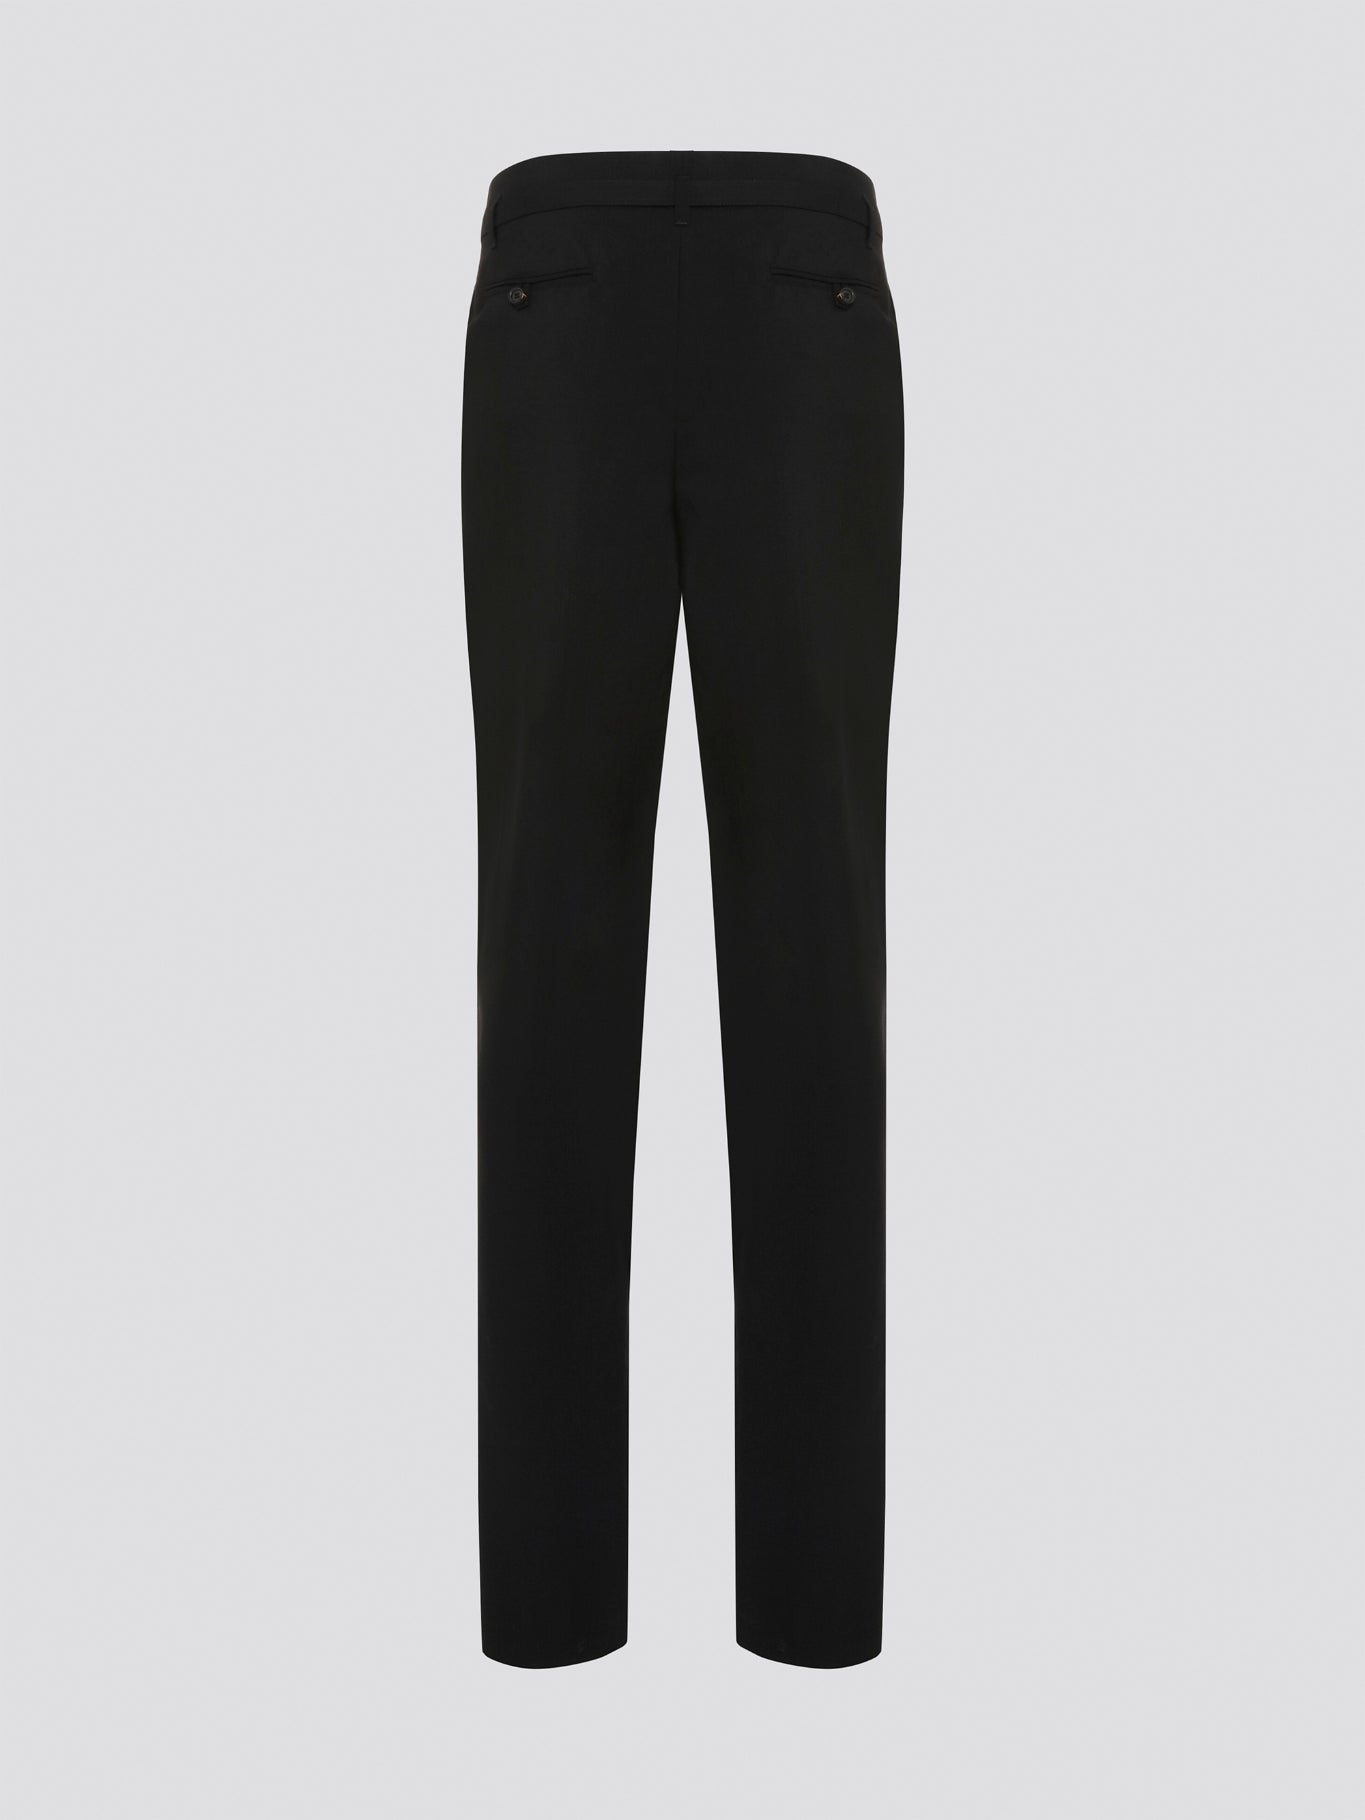 Step up your style game with these chic Black Belted Pleated Trousers by Roberto Cavalli, designed to make a statement. The flattering pleats and elegant belt detailing give these trousers a sophisticated edge, perfect for any fashion-forward individual. Whether worn to the office or a night out on the town, these trousers are sure to turn heads and leave a lasting impression.